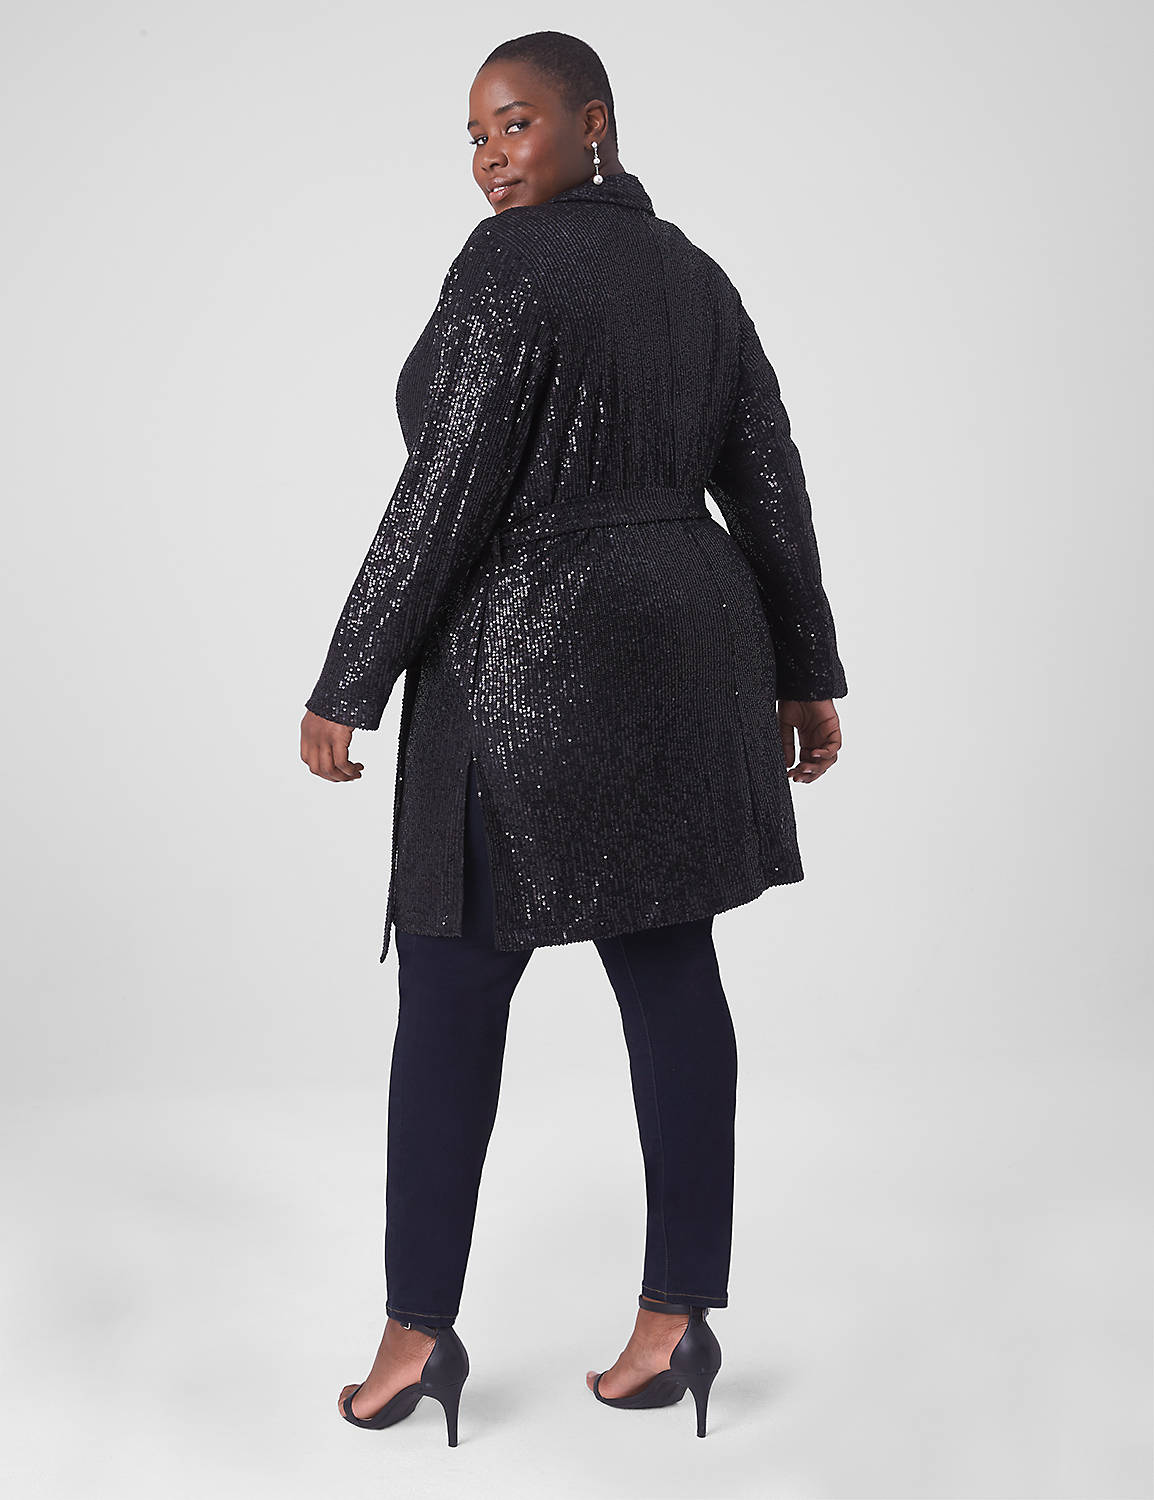 Le Hook Sequin Duster with Belt 113 Product Image 2